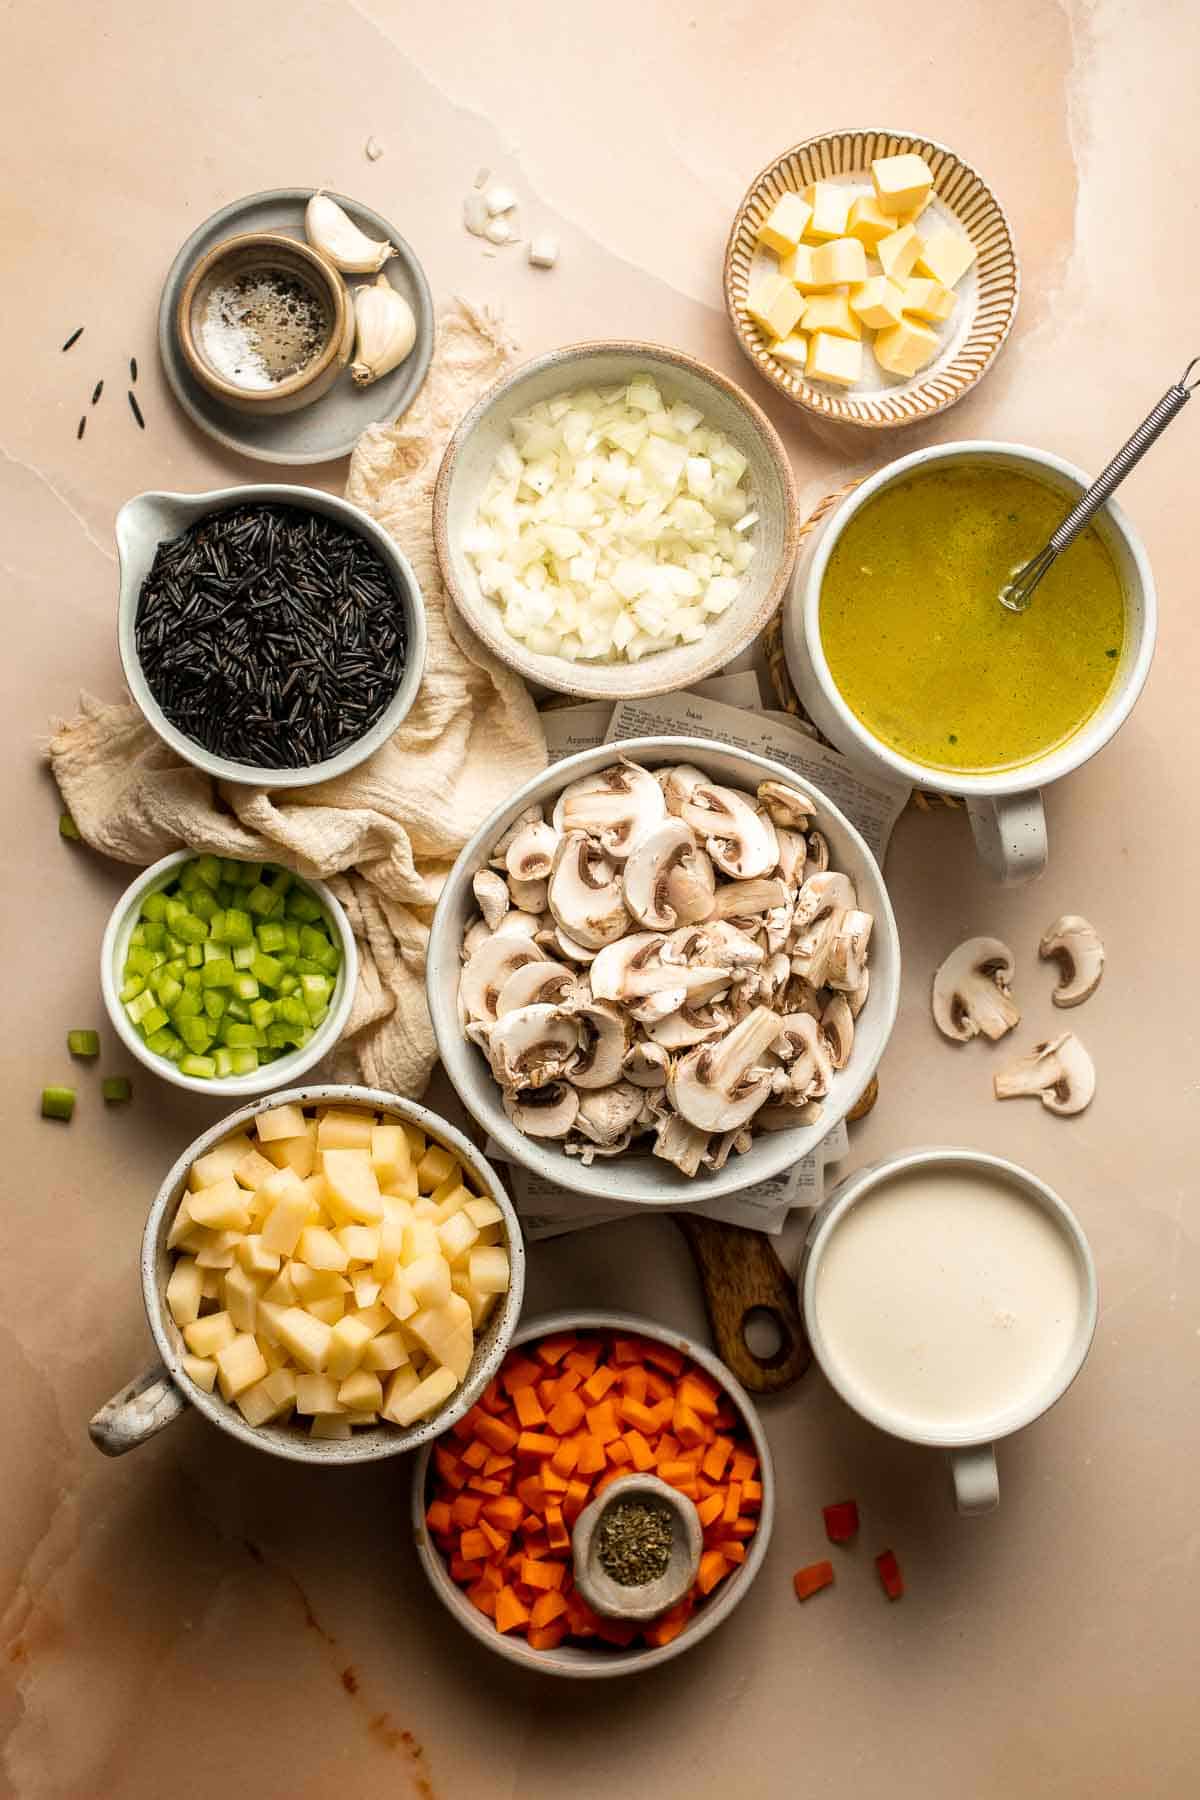 This homemade Creamy Wild Rice Soup is a simple recipe made with mushrooms, nutty wild rice, and yellow potatoes to offer a variety of textures and flavors. | aheadofthyme.com